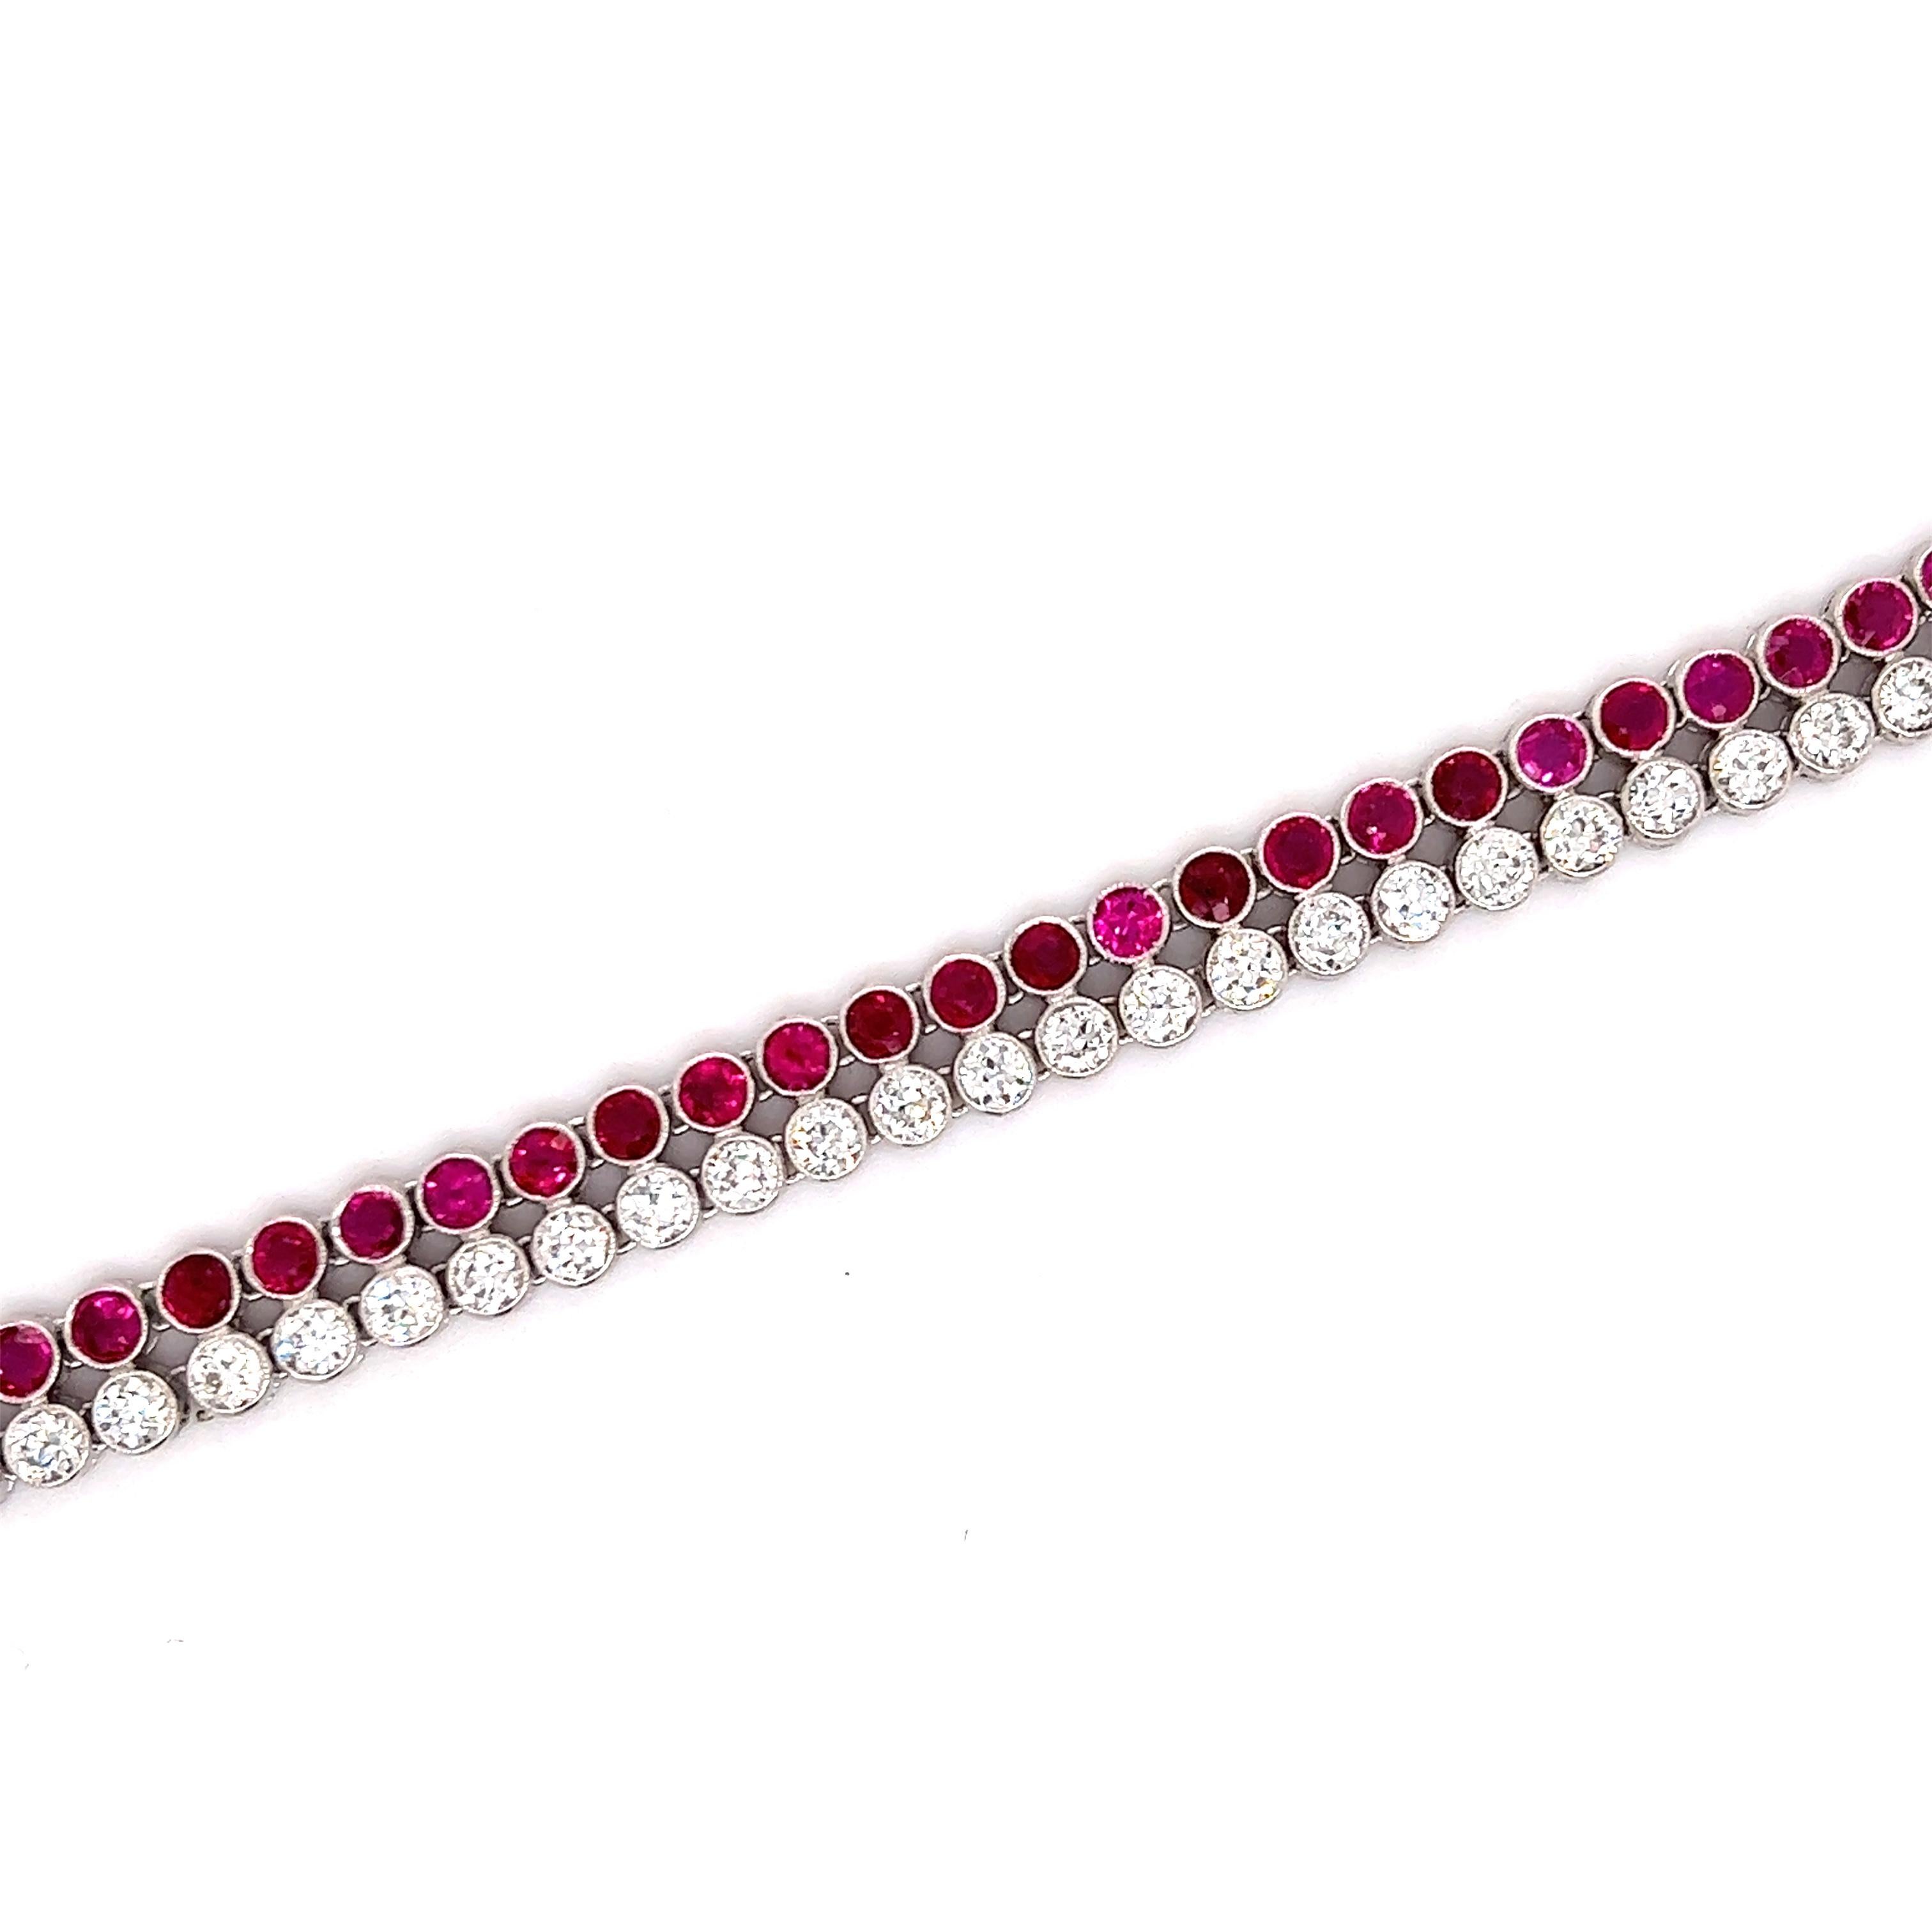 Amazing art deco creation crafted in platinum. The bracelet is set with two rows of gemstones that lay parallel next to each other. The gemstones is this bracelet are old European cut diamonds and Burmese rubies. There are approximately 4.90 ct. of